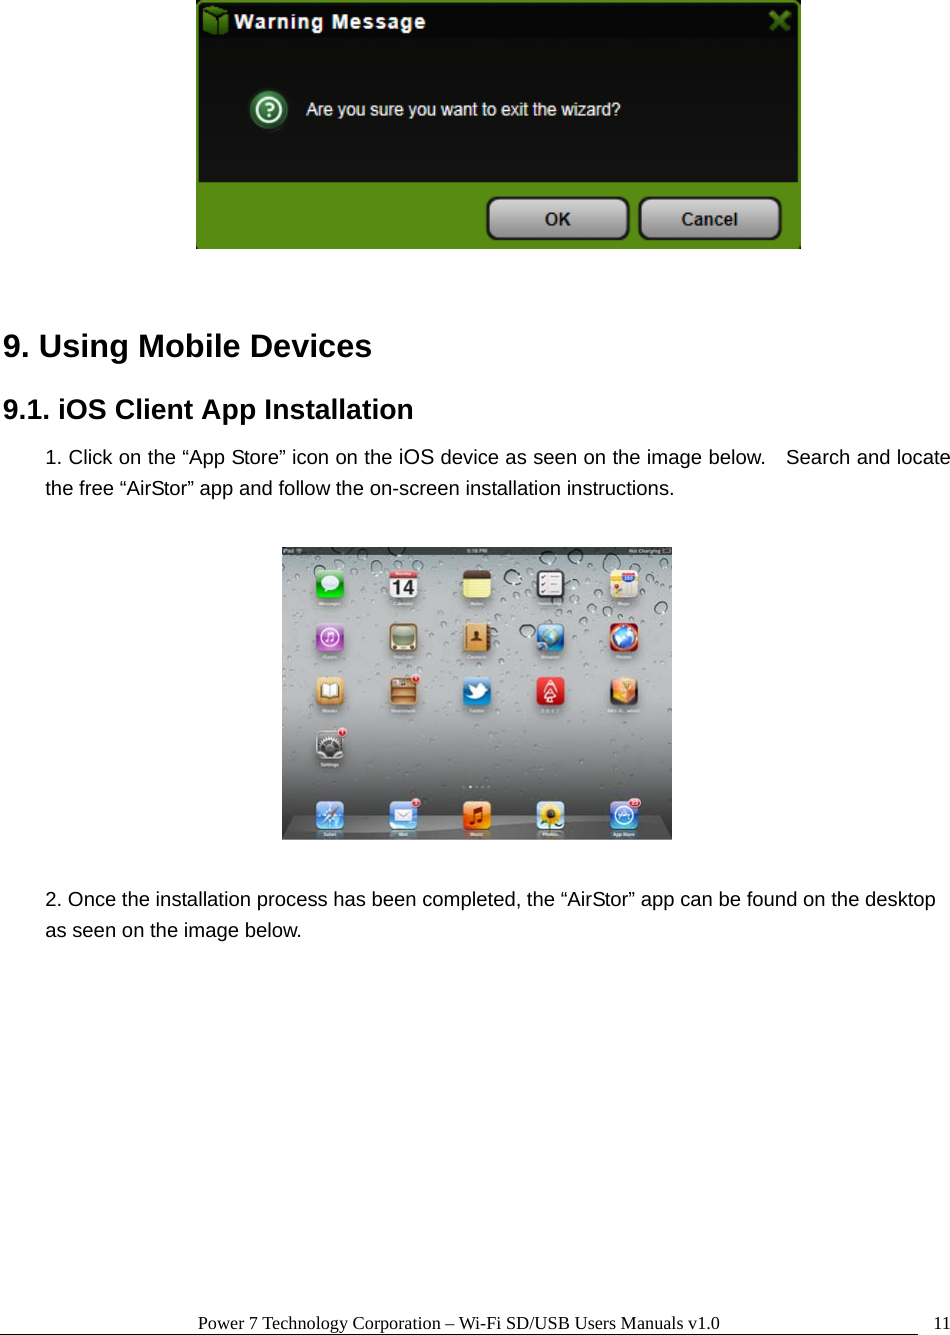 Power 7 Technology Corporation – Wi-Fi SD/USB Users Manuals v1.0  11  9. Using Mobile Devices 9.1. iOS Client App Installation 1. Click on the “App Store” icon on the iOS device as seen on the image below.    Search and locate the free “AirStor” app and follow the on-screen installation instructions.    2. Once the installation process has been completed, the “AirStor” app can be found on the desktop as seen on the image below.    